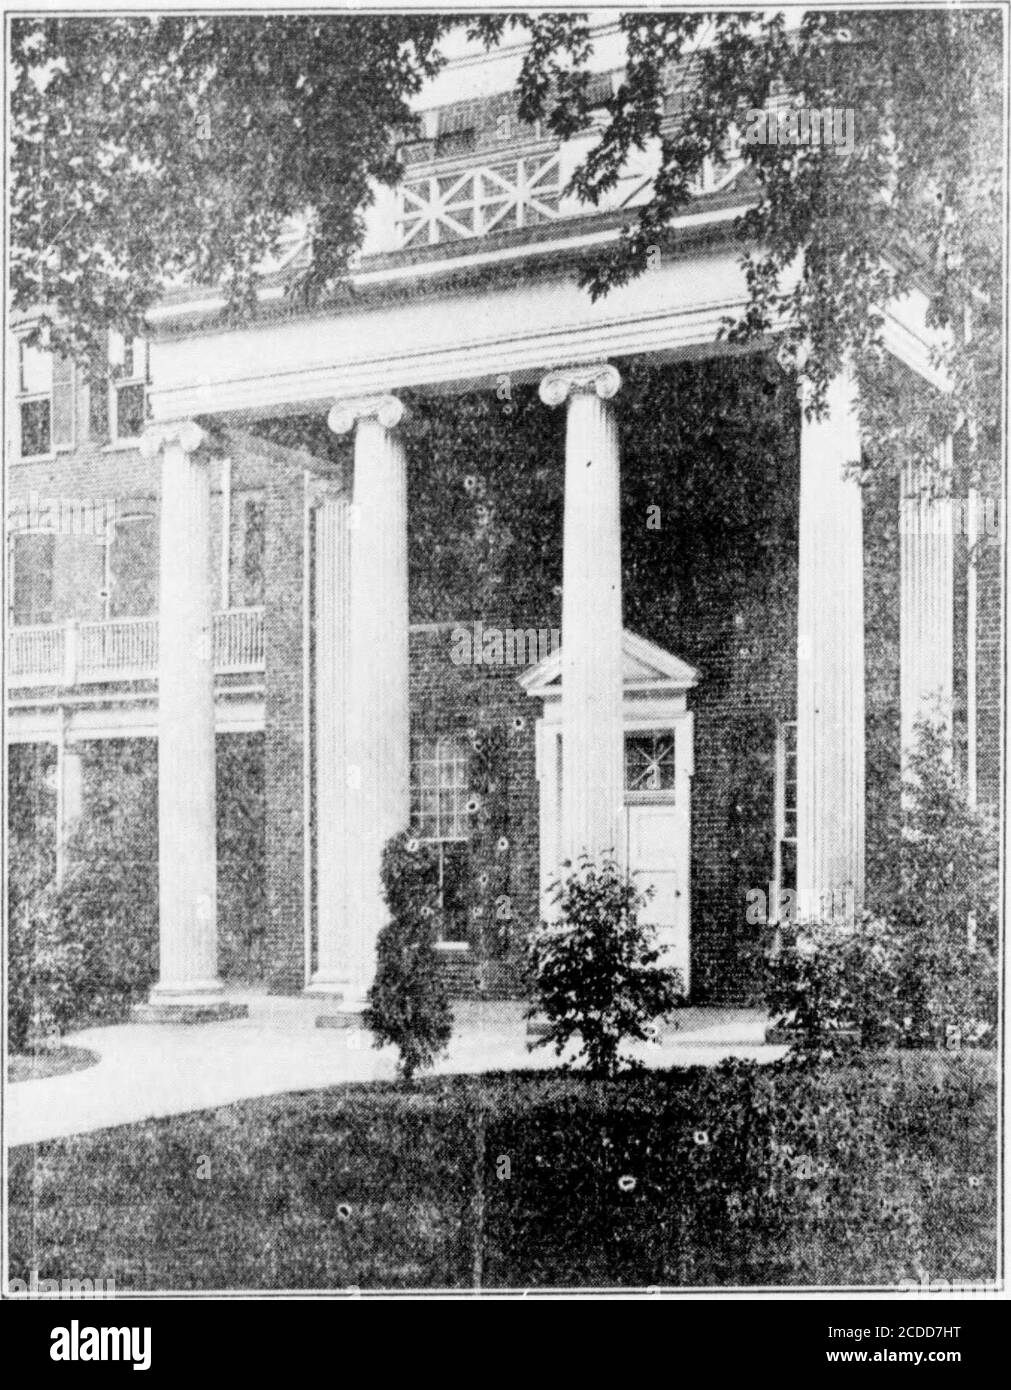 . The Rotunda . Mrs. Smithwill make their home in Roanoke. Miss Annie Ward Fitzgerald andLuten Inge were married on Satur-day, February 25 in Crewe, Virginia. A quiet, but lovely wedding tookplace in the home of Dr. and Mrs.D. F. Weaver of Orange, when theirdaughter, Virghiia ITenkol, becamethe bride of Mrs. William SwadleyErwin. Mr. and Mrs. Erwin will maketheir home in Bristol, Tenn. DEATHS Bessie E. Sampson of South Rich-mond, class of 190S, died on Febru-ary 7, 1928. Mamie Carwile, class of 1917, diedat her home in Pamplin on February23, 1928. IN ME MORI AM Mis. Sallie Peck Booker, wife of Stock Photo